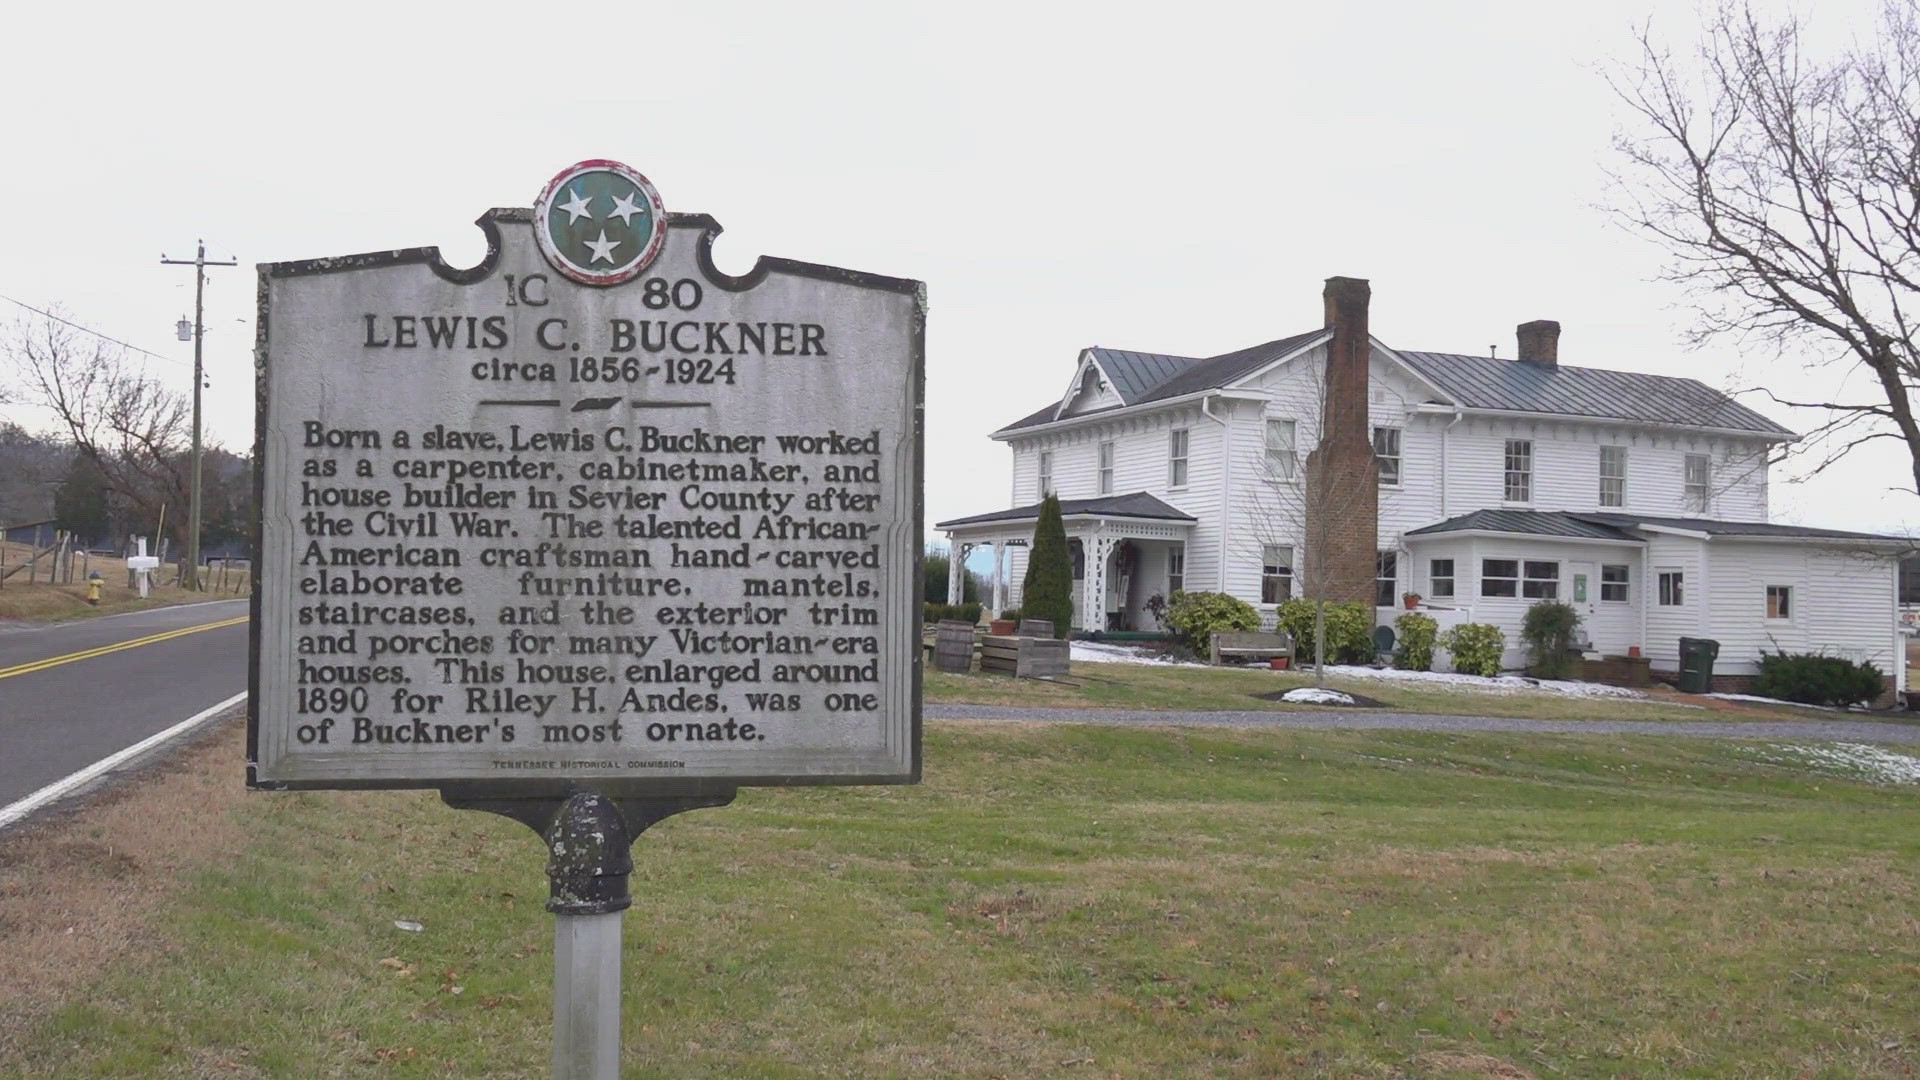 With no formal education, Buckner was drawn to carpentry—implementing the trees he found around Sevierville into his work.